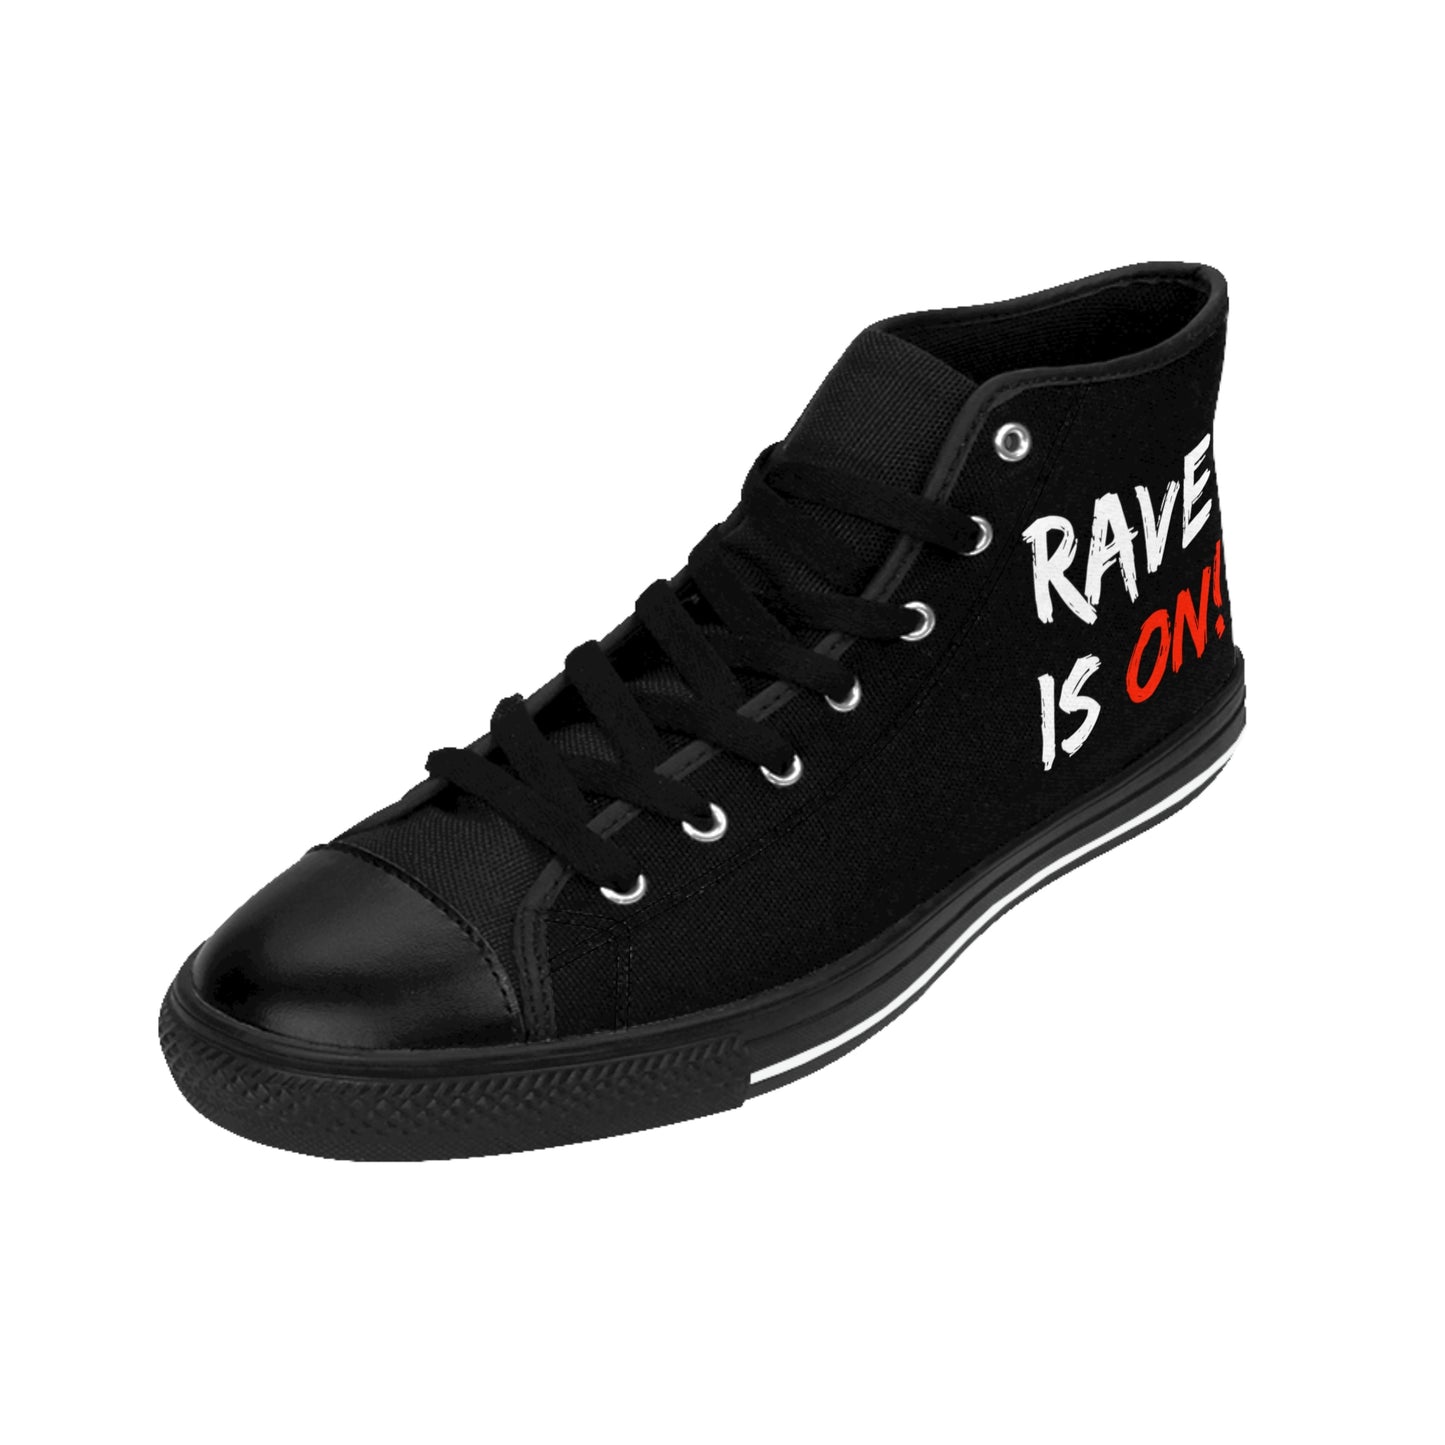 Rave is on! - Men's High-Top Sneakers